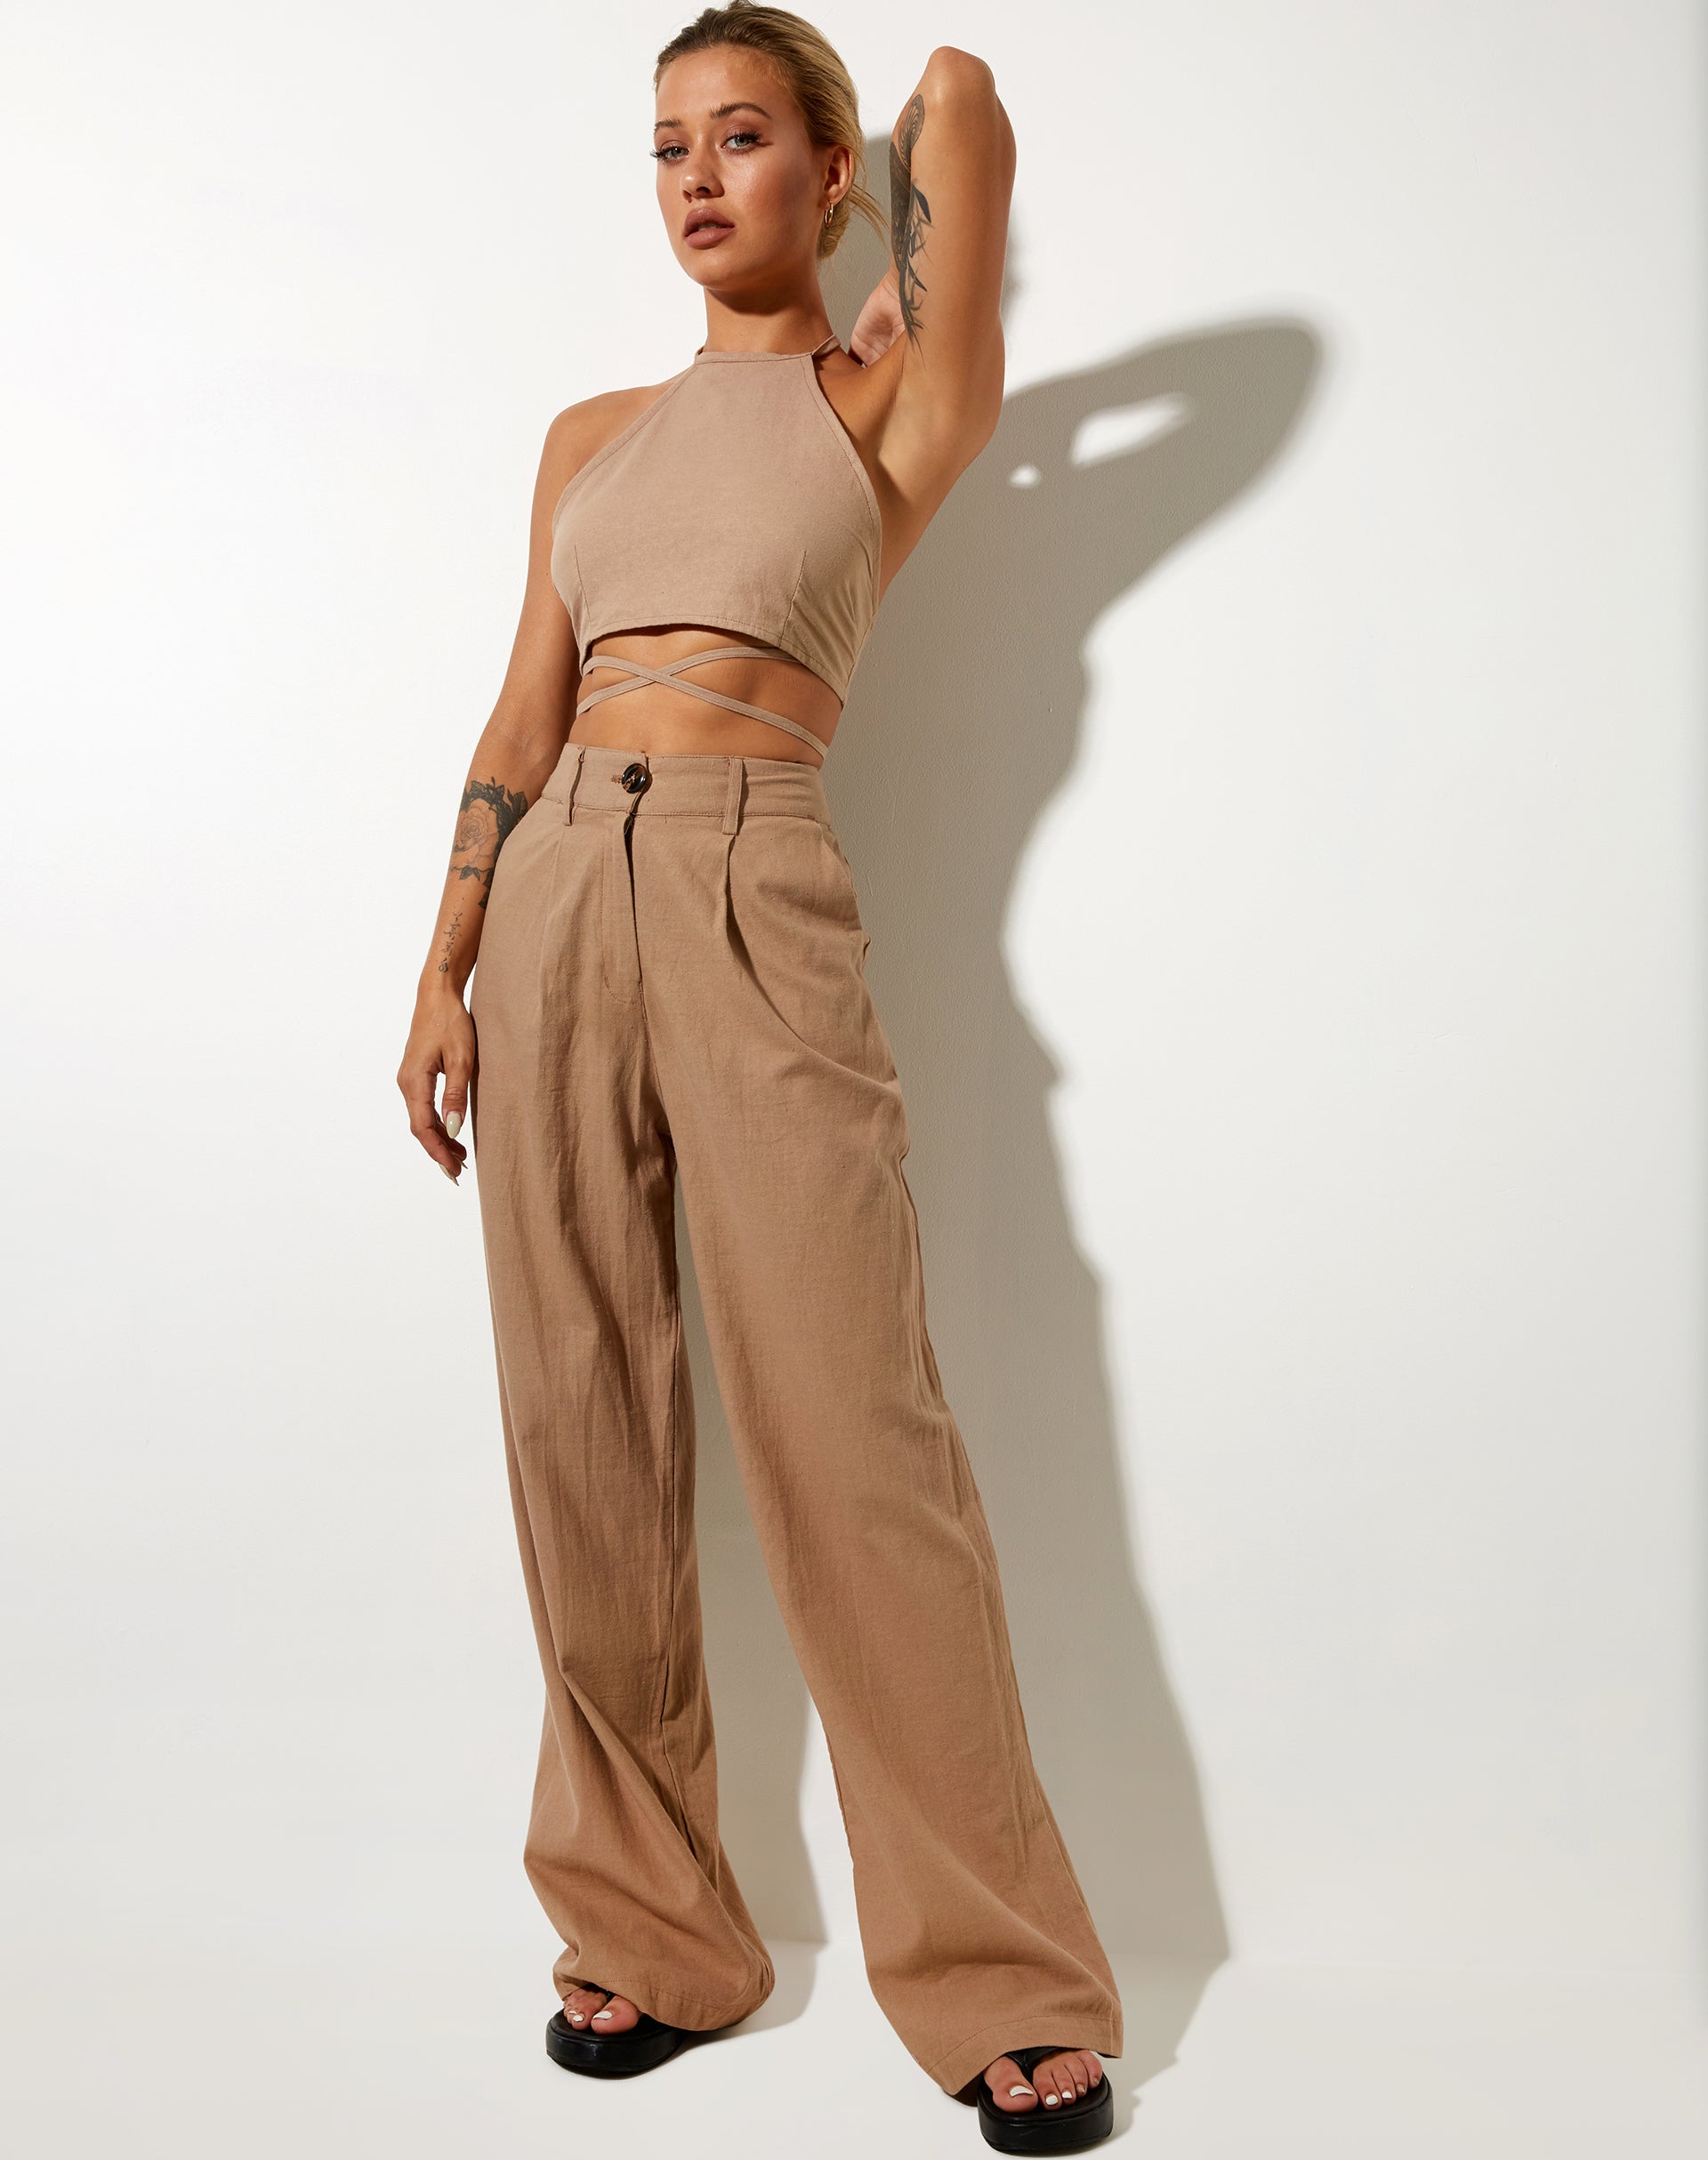 Image of Levo Trouser in Rami Biscuit